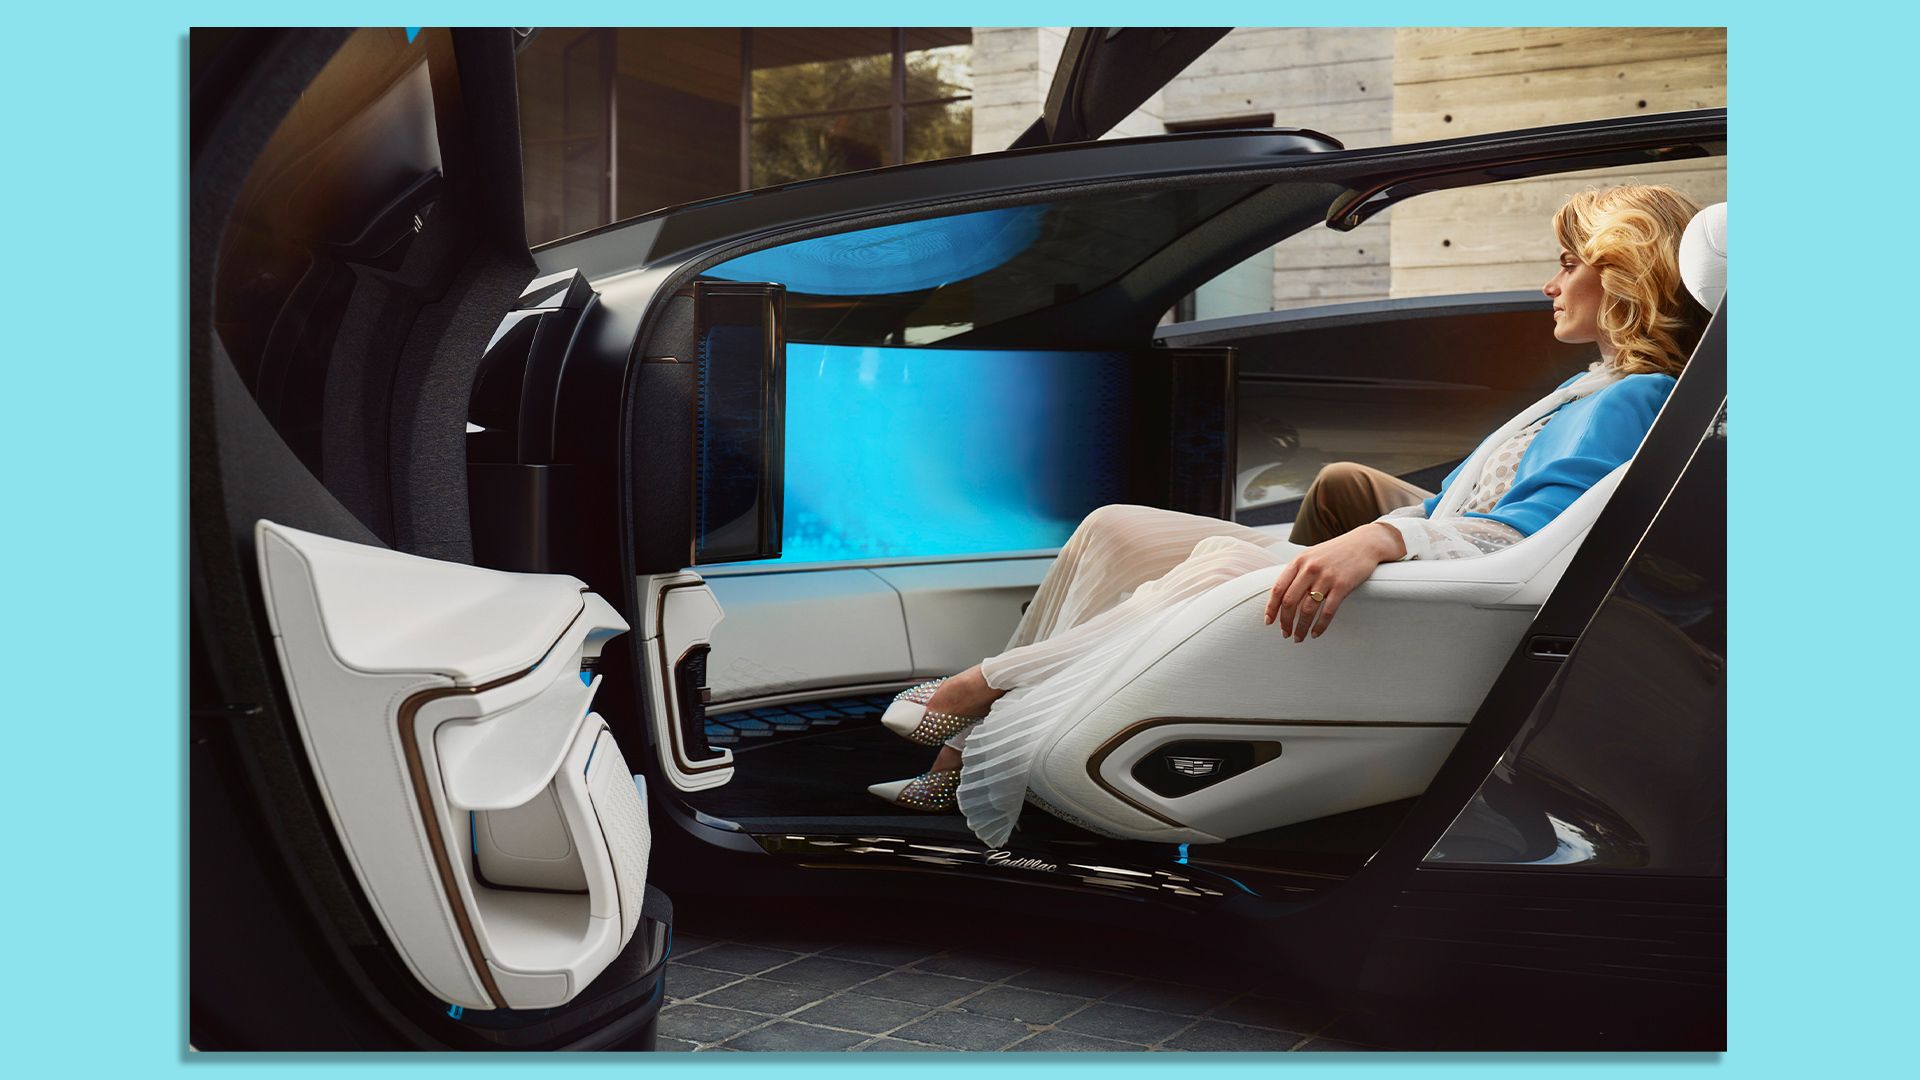 Image of a woman relaxing inside Cadillac's InnerSpace self-driving concept car